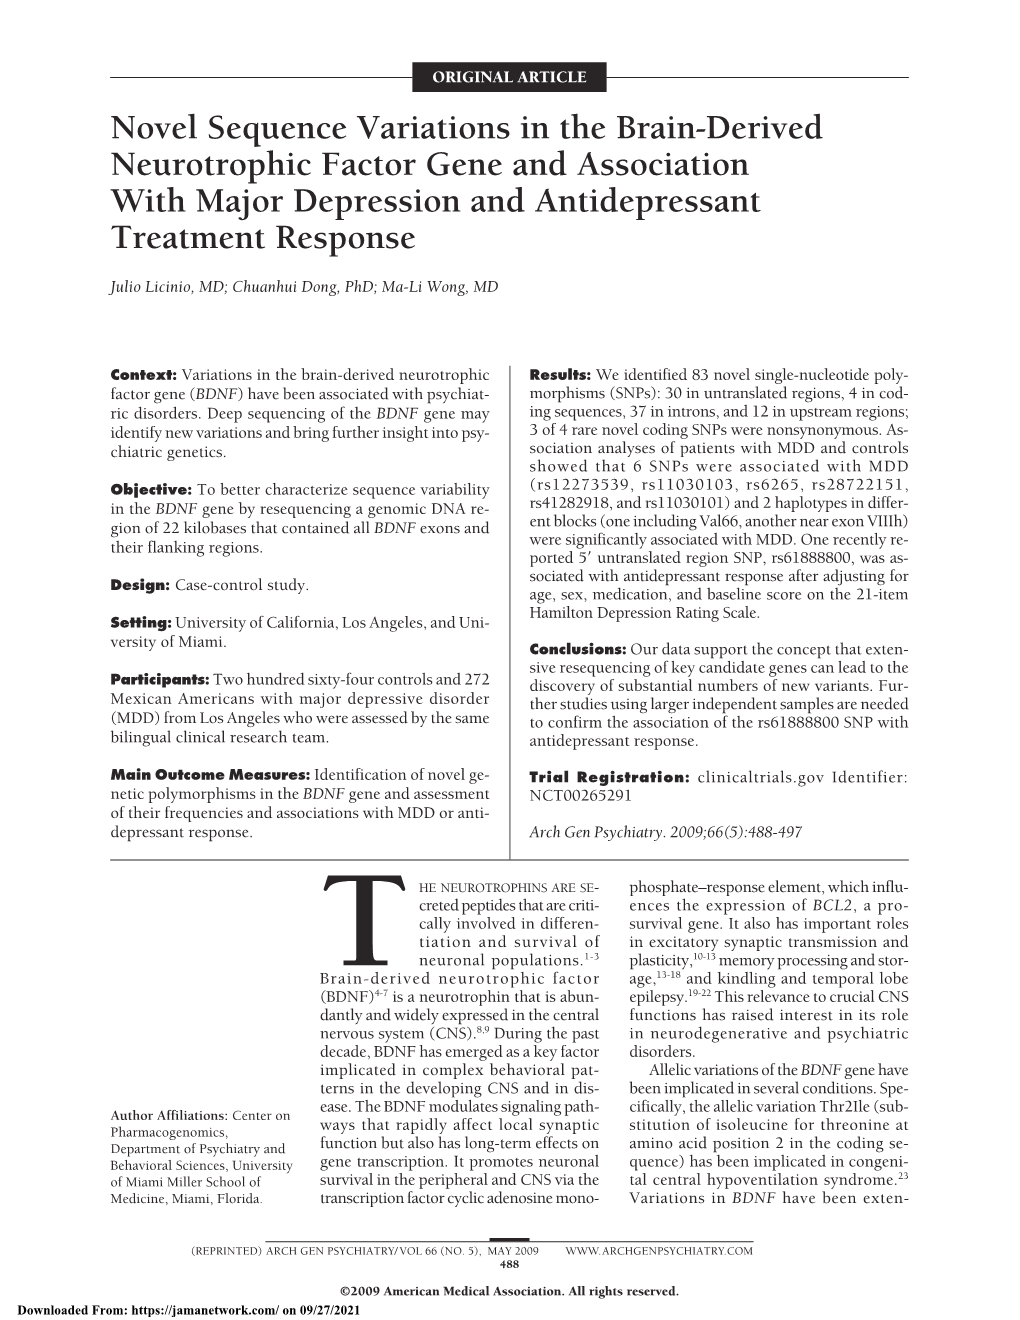 Novel Sequence Variations in the Brain-Derived Neurotrophic Factor Gene and Association with Major Depression and Antidepressant Treatment Response